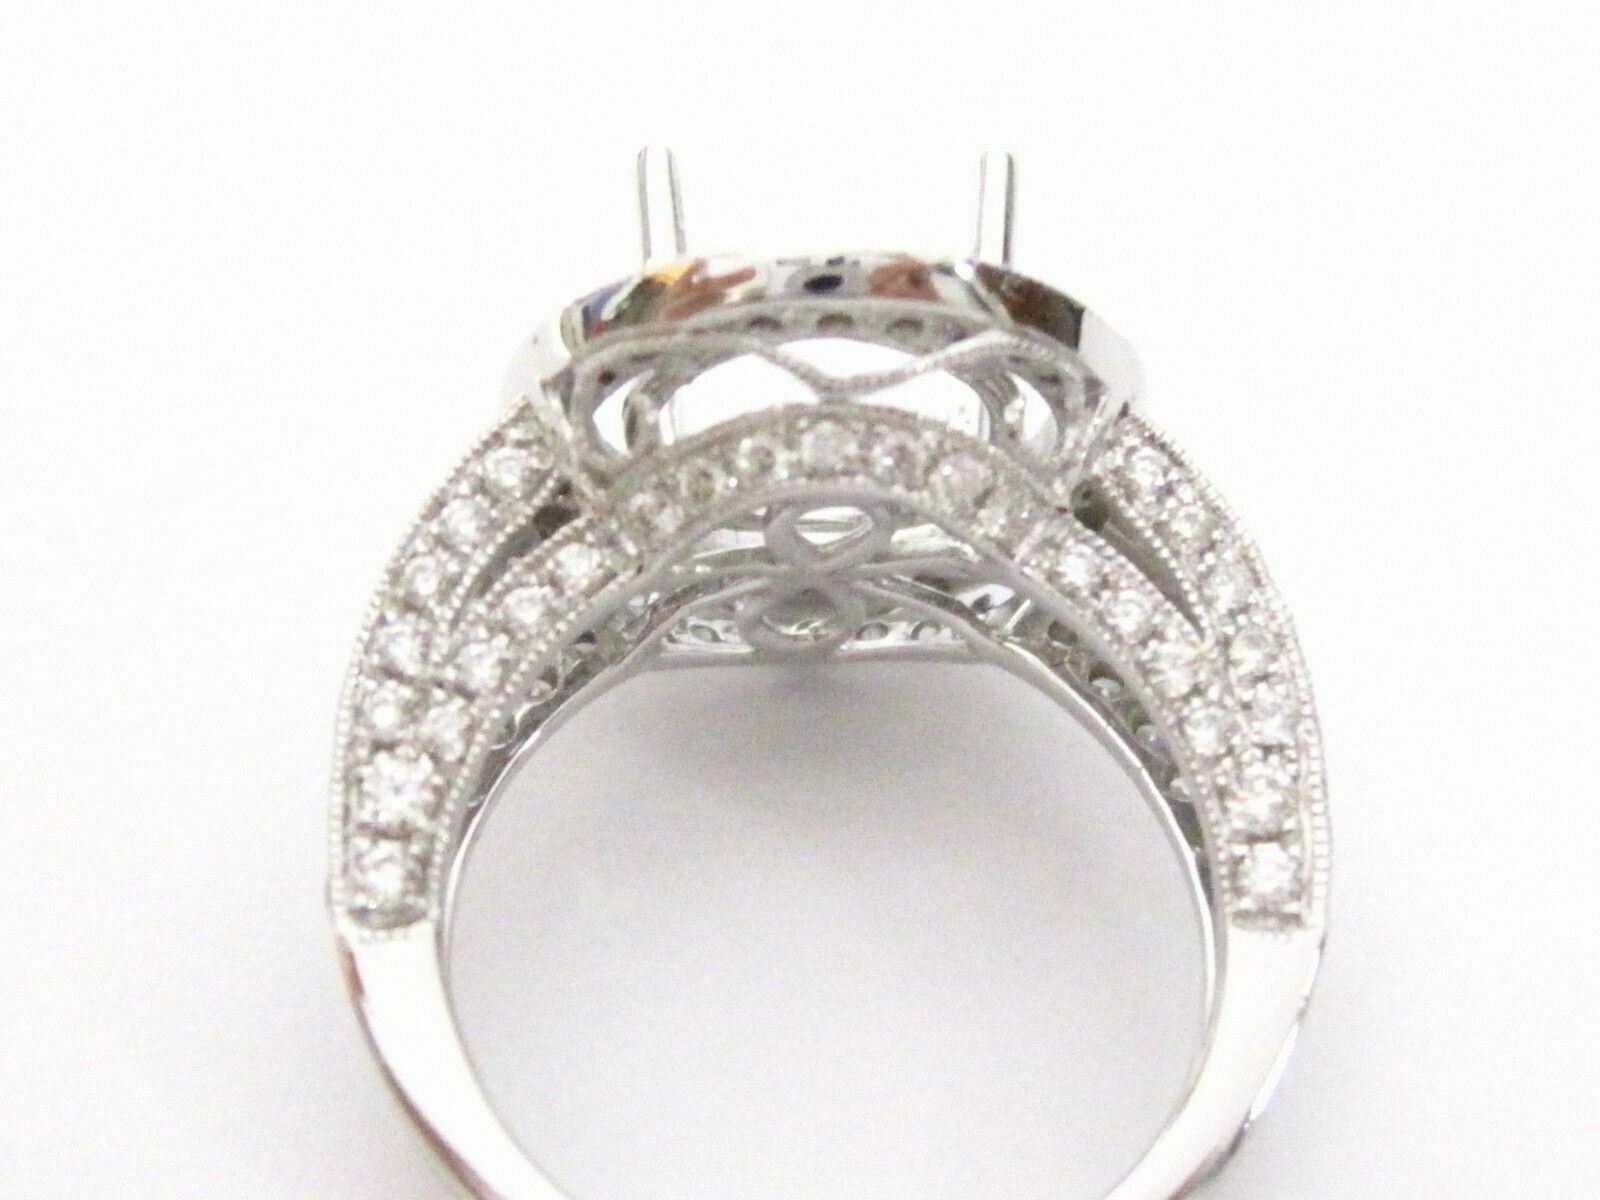 Fine 4 Prongs Semi-Mounting for Oval Diamond Ring Engagement 14k White Gold